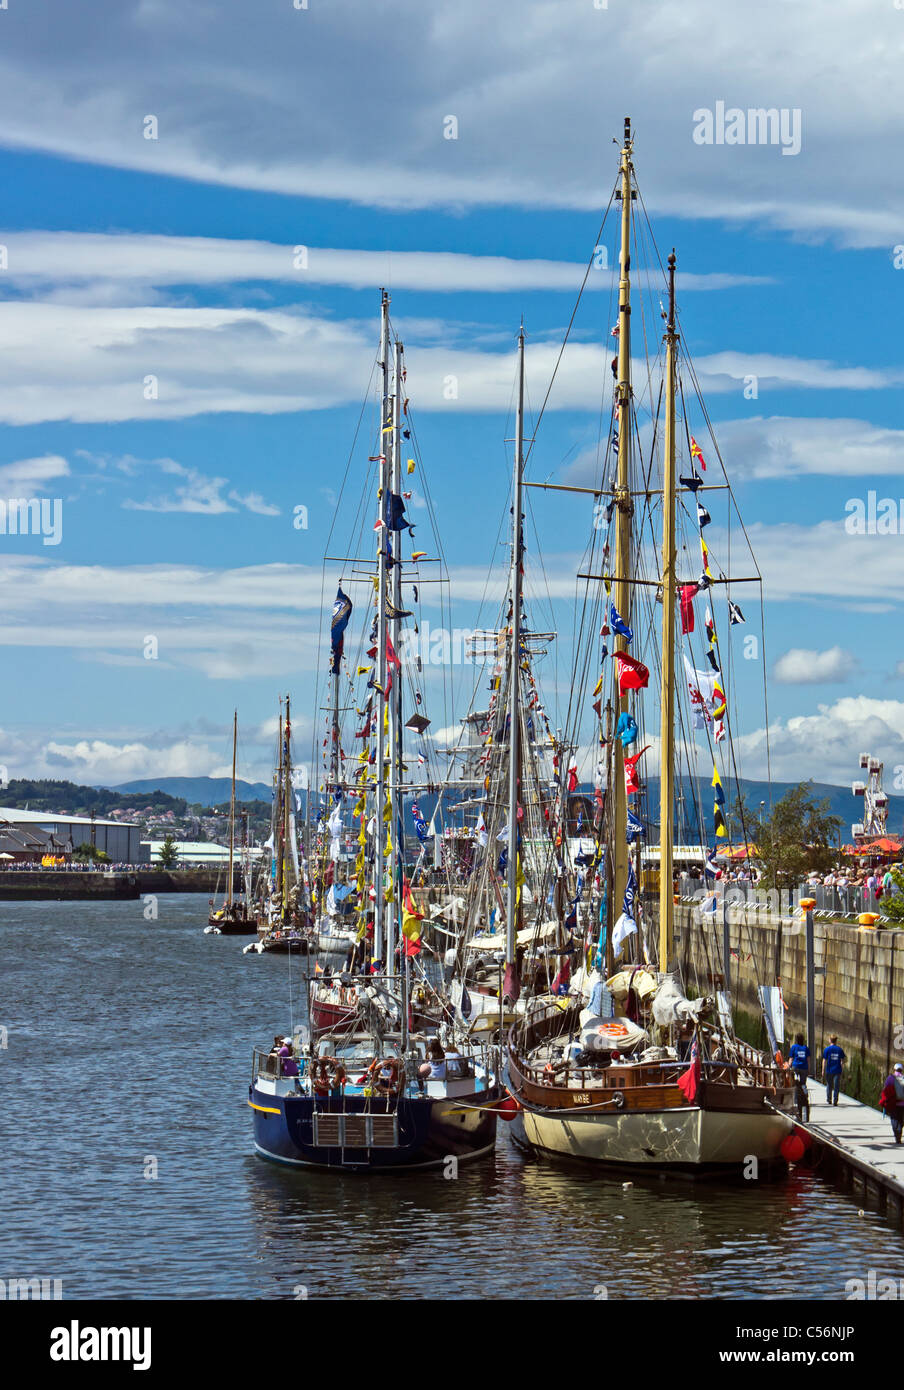 Sailing ships participating in the Tall Ships Races 2011 moored in James Watt Dock Greenock harbour Scotland Stock Photo